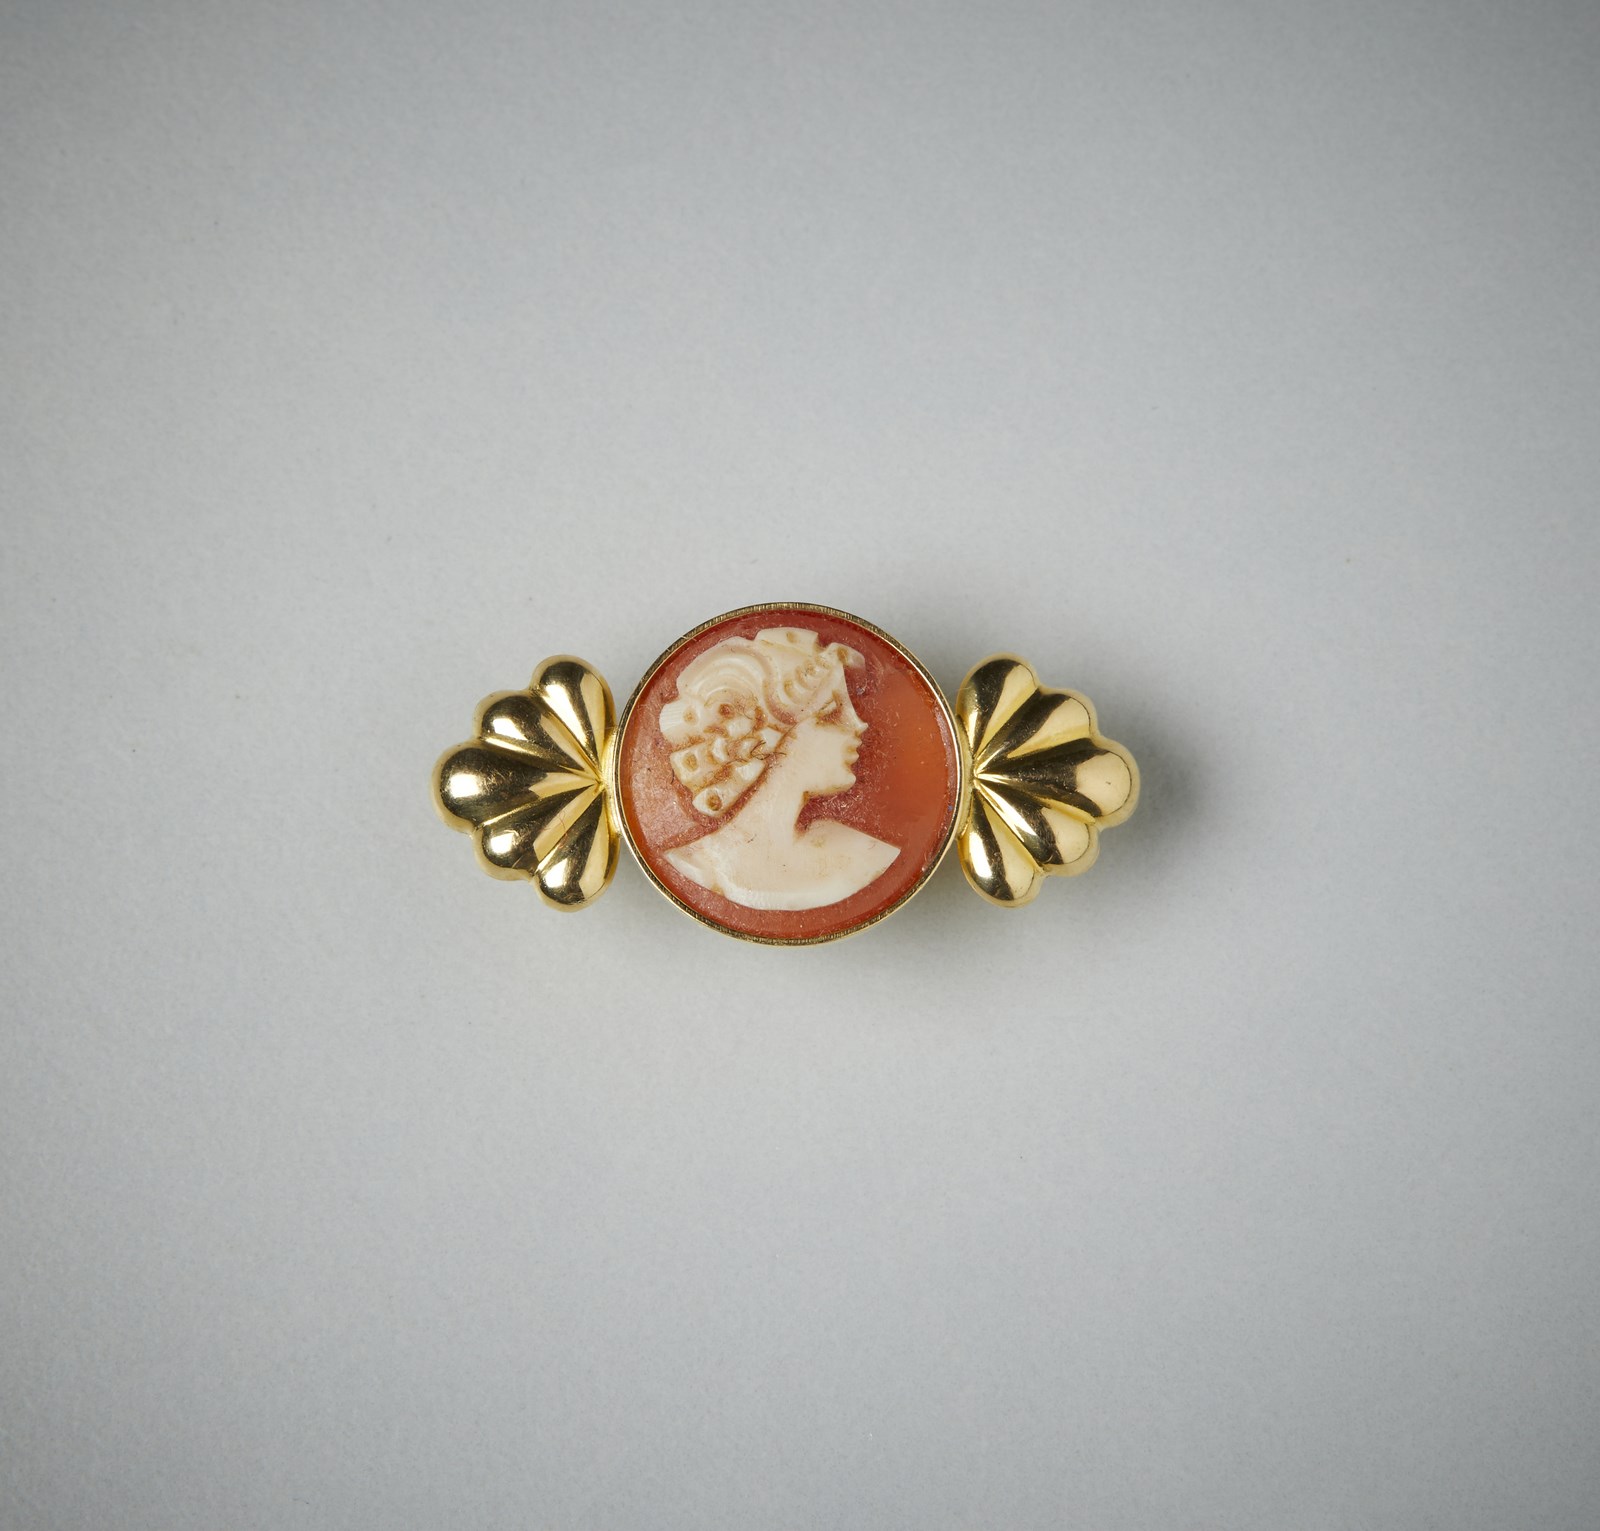 Small yellow gold 750/1000 brooch with side shells in yellow gold 750/1000 and small central cameo. (. )